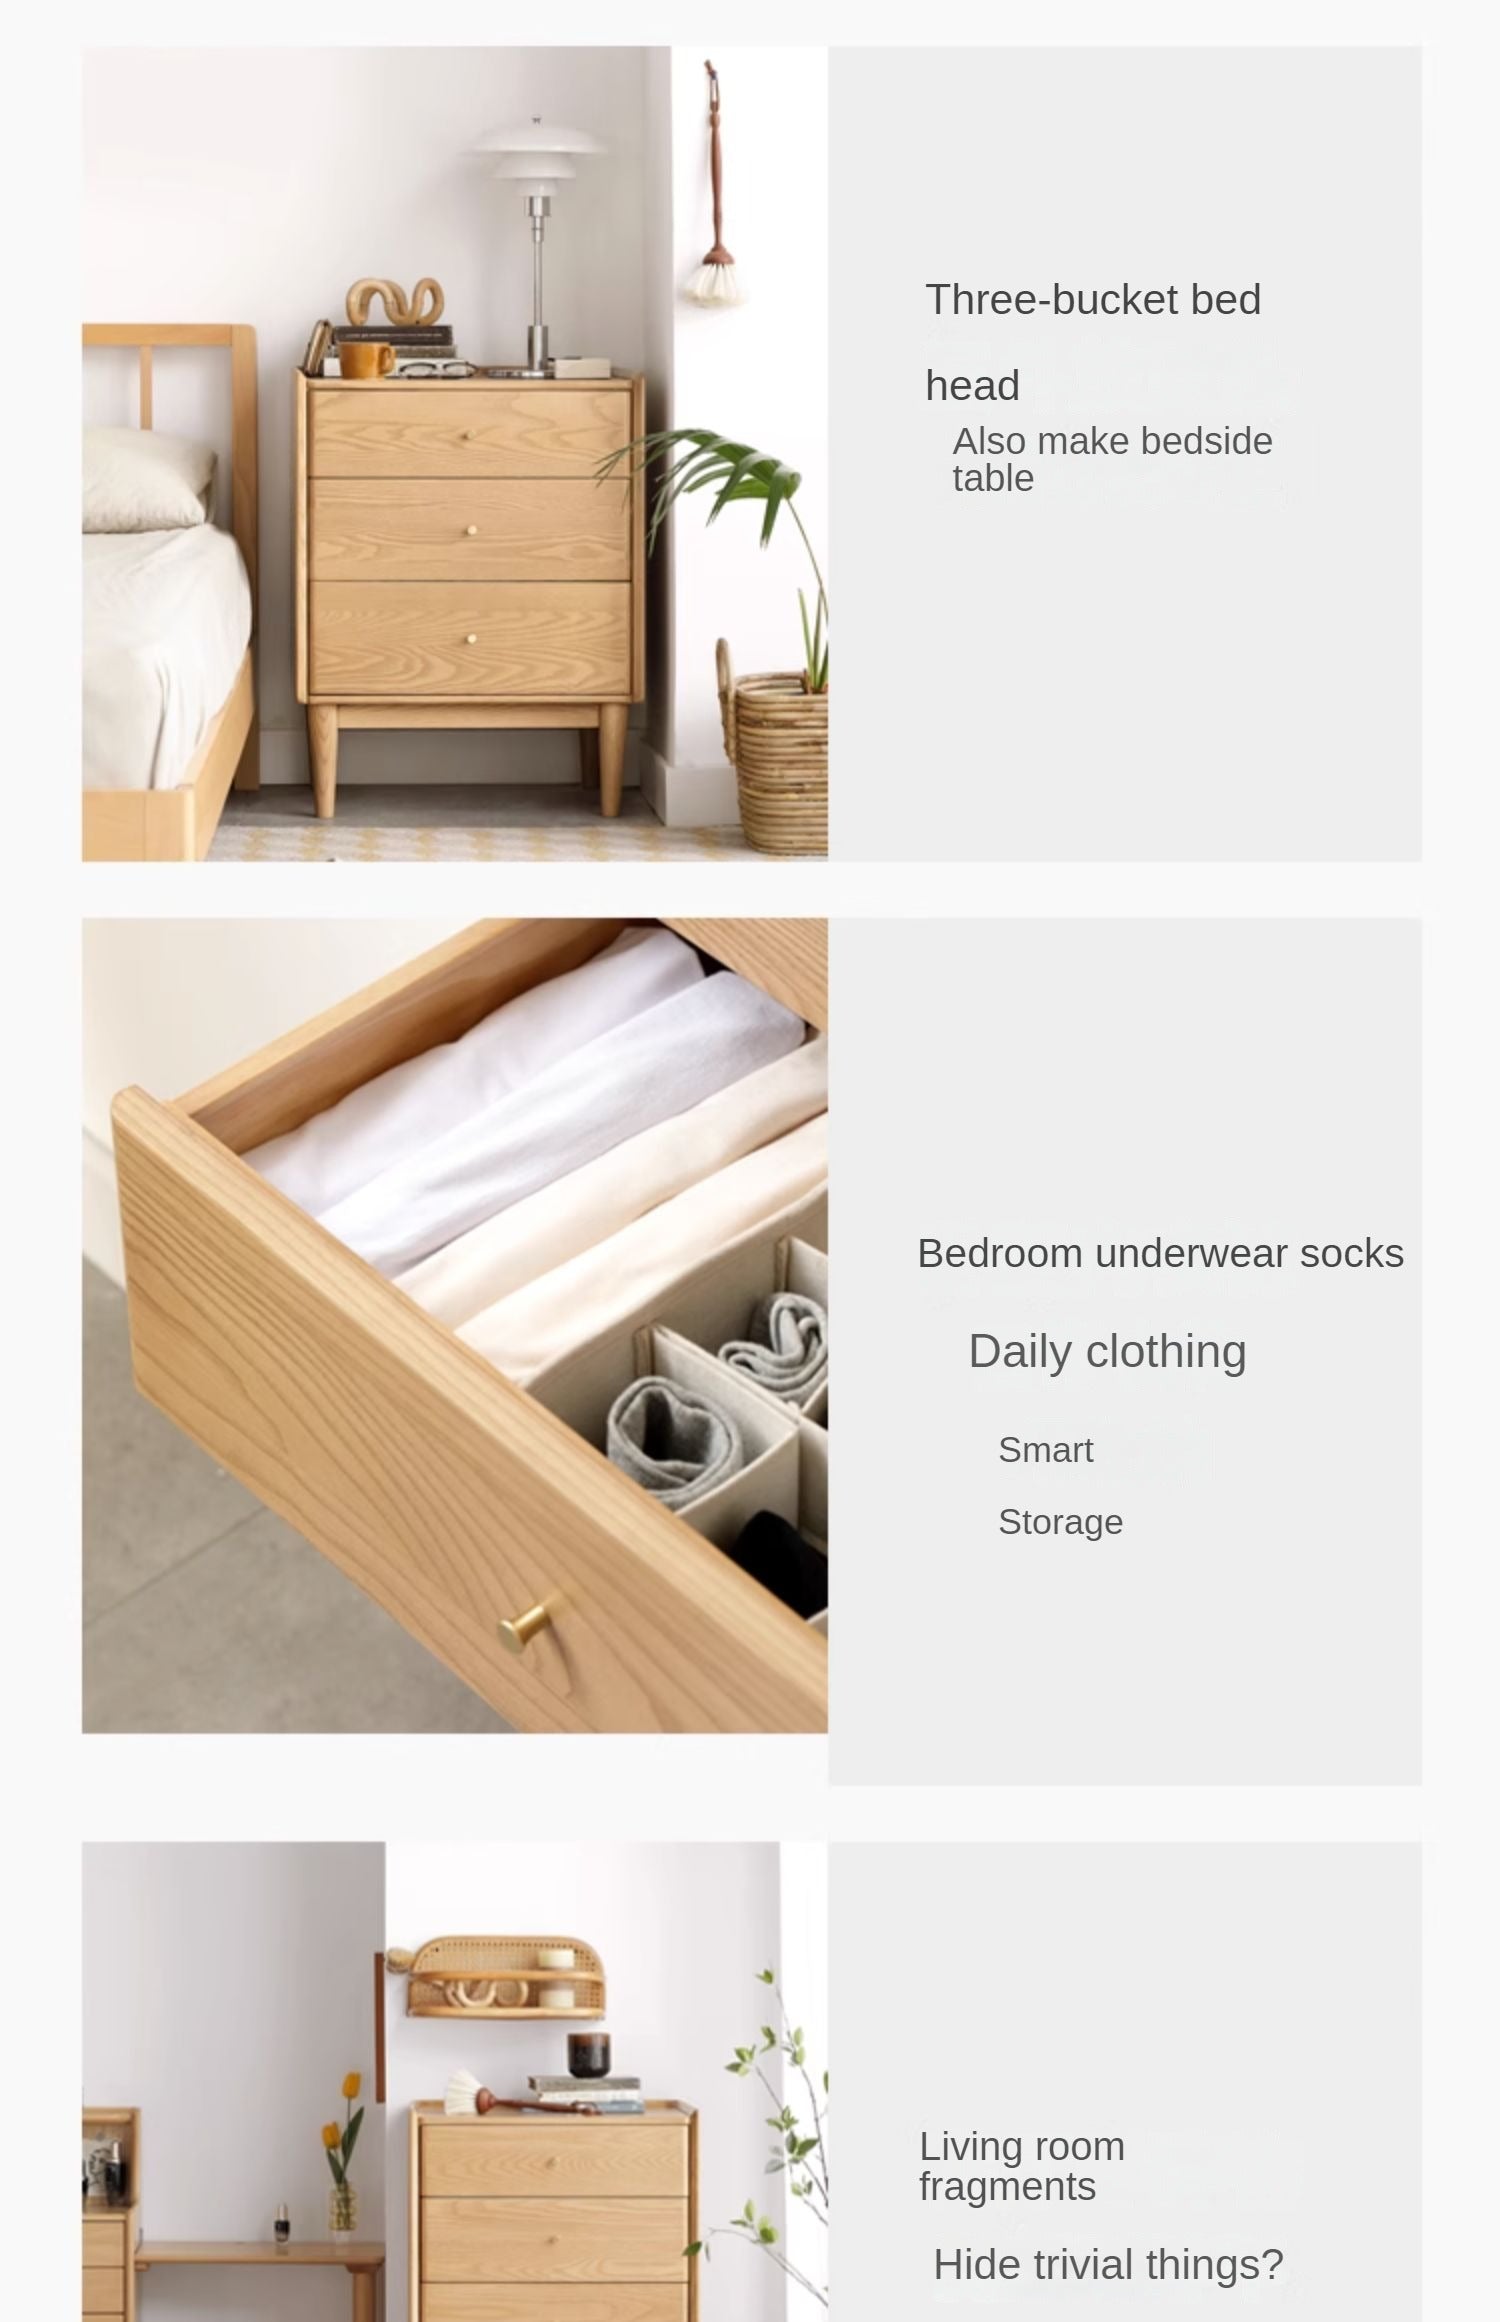 Ash Solid Wooden chest of drawers Cabinet"